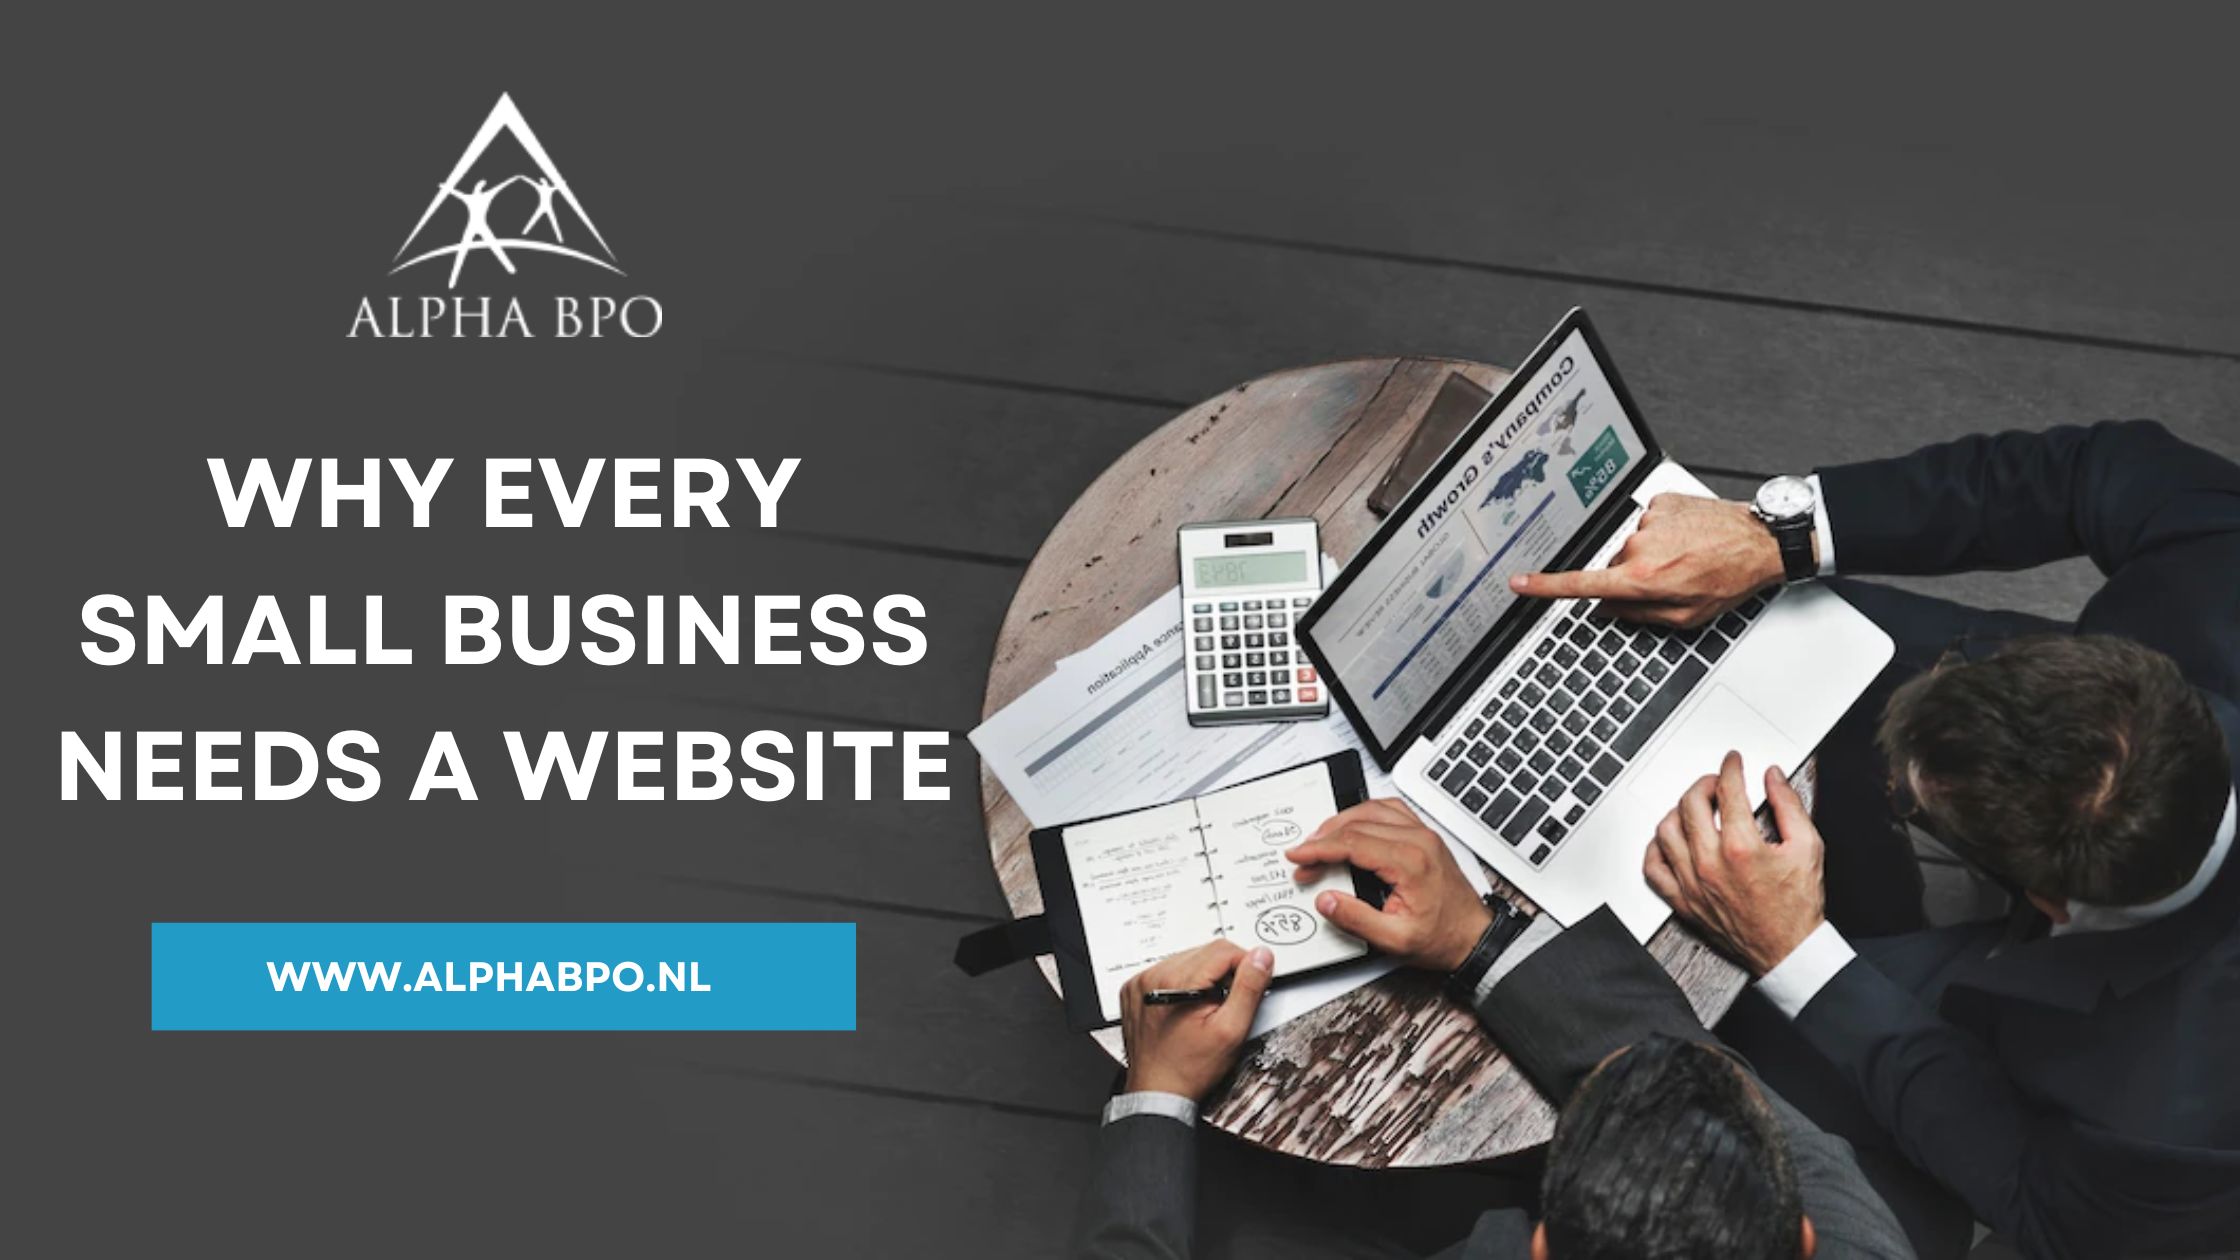 Why Every Small Business Needs a Website